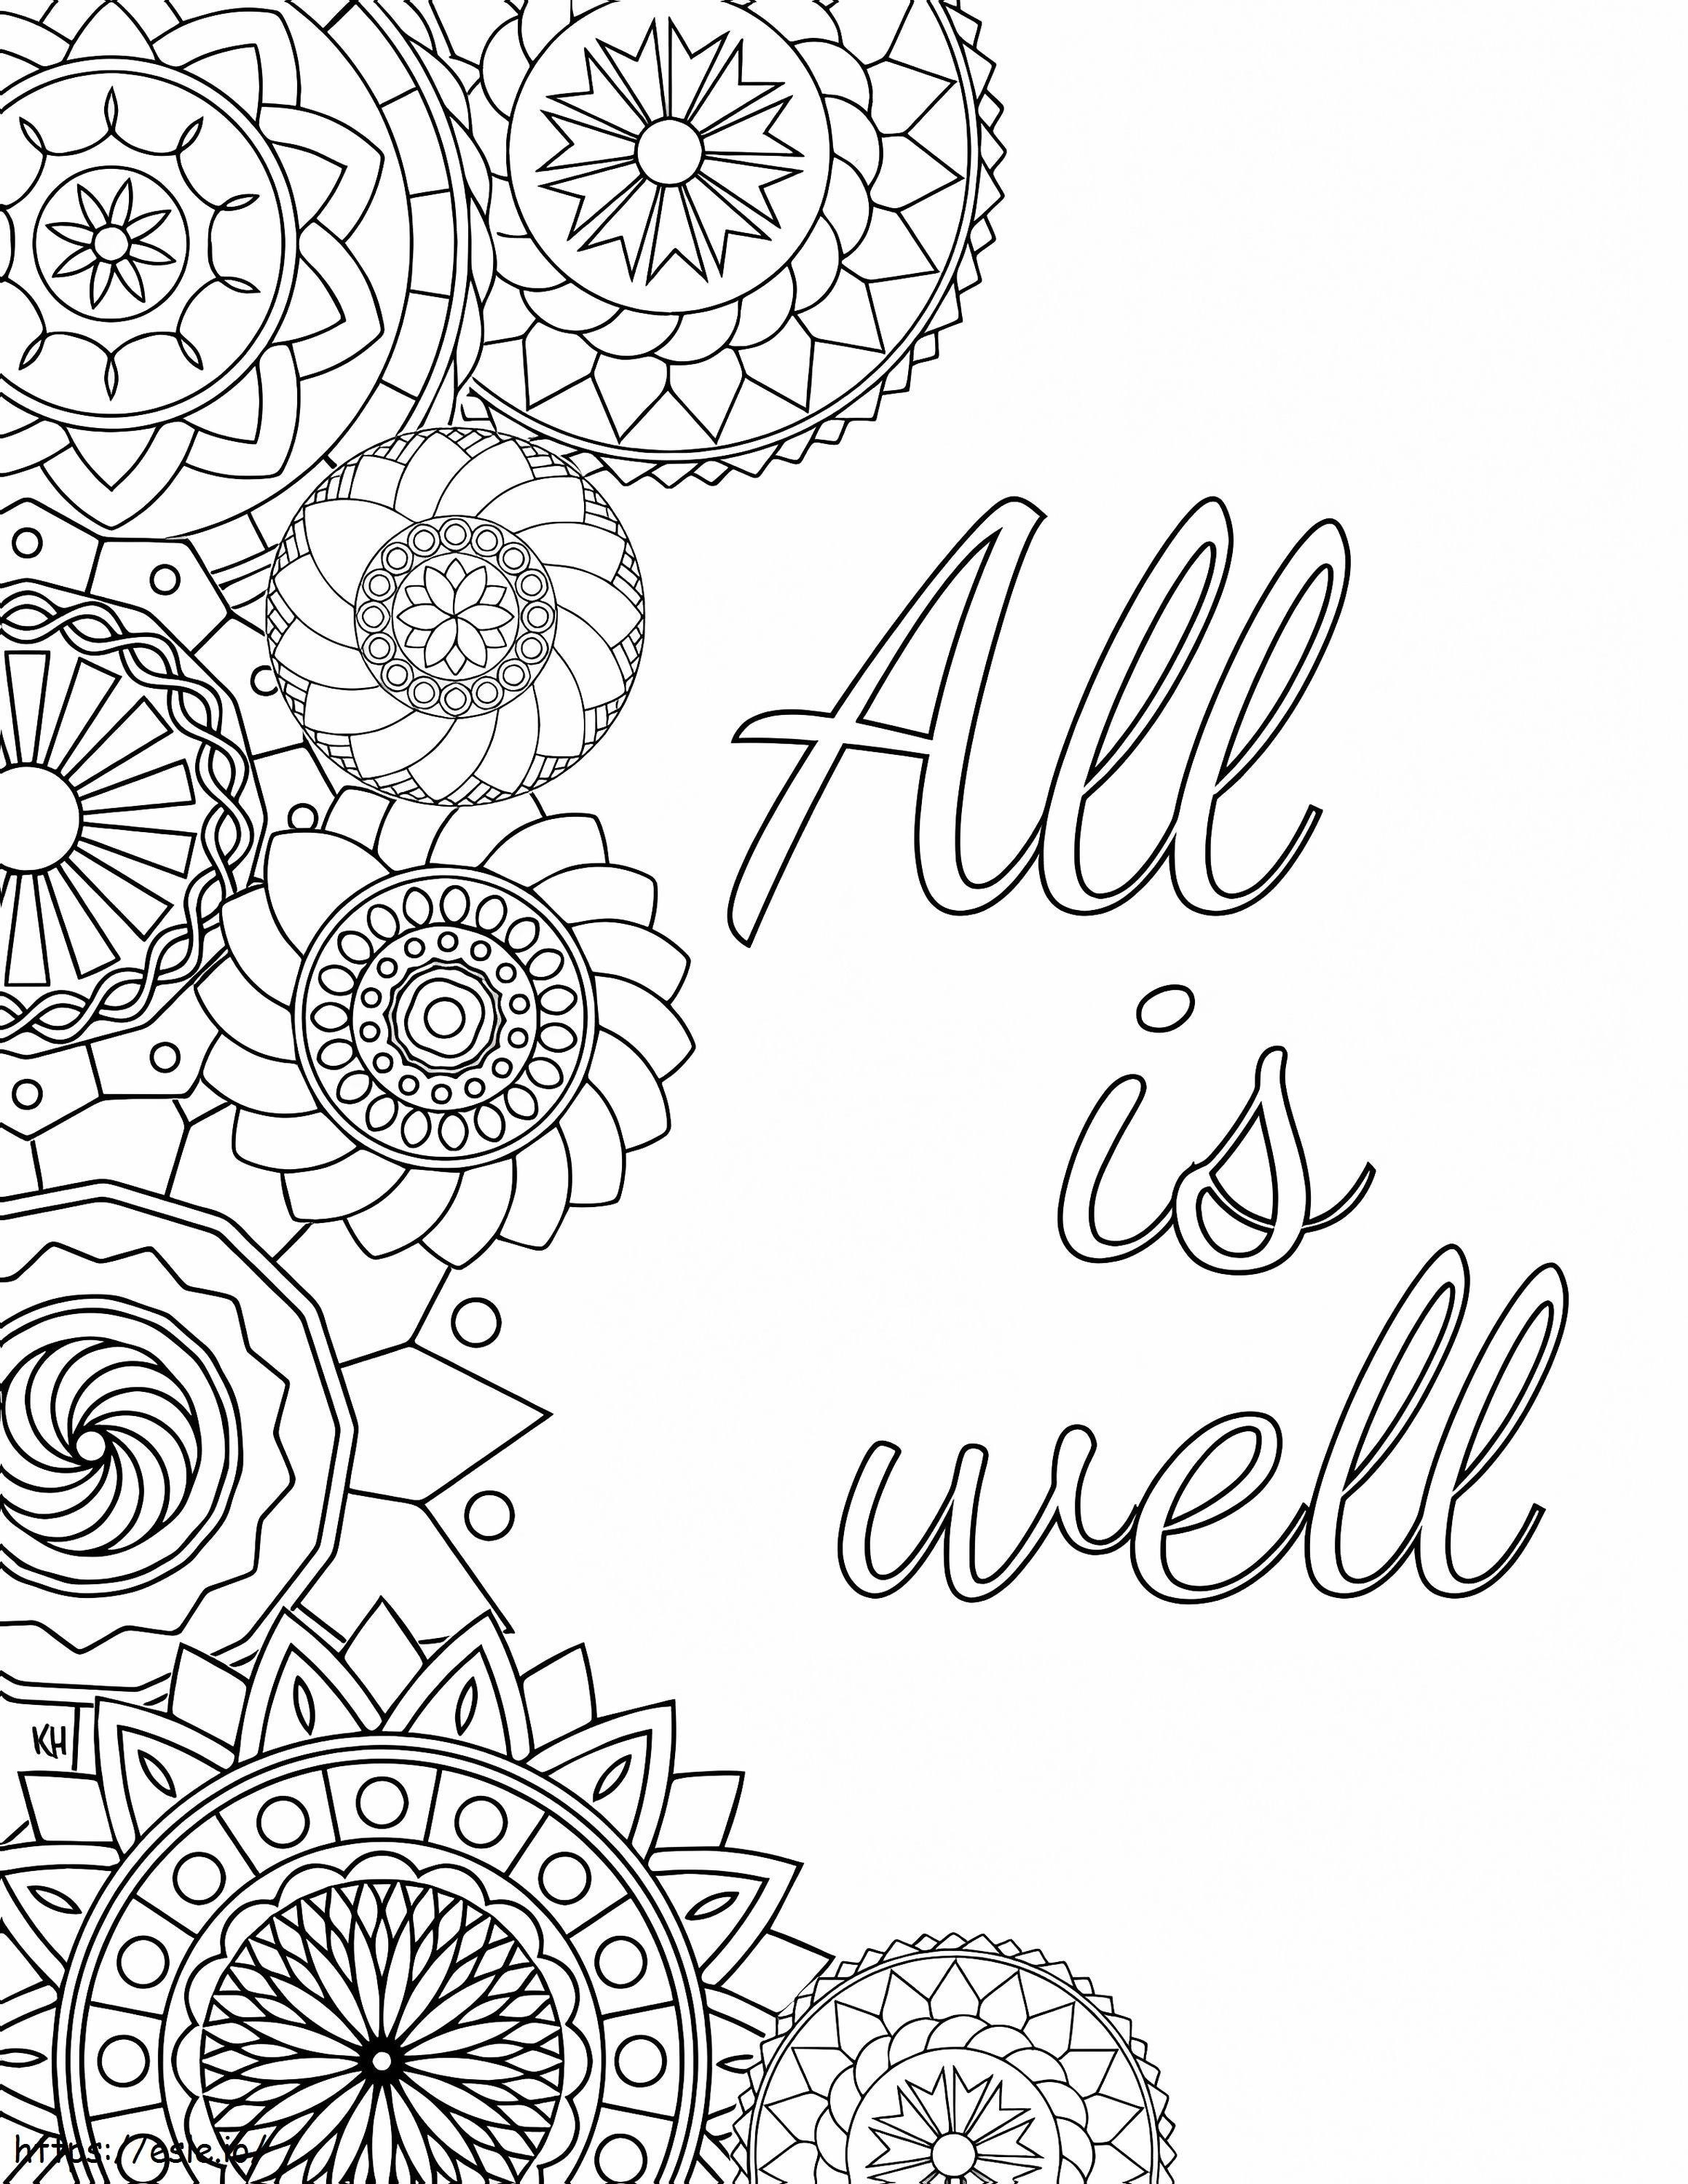 All Is Well coloring page